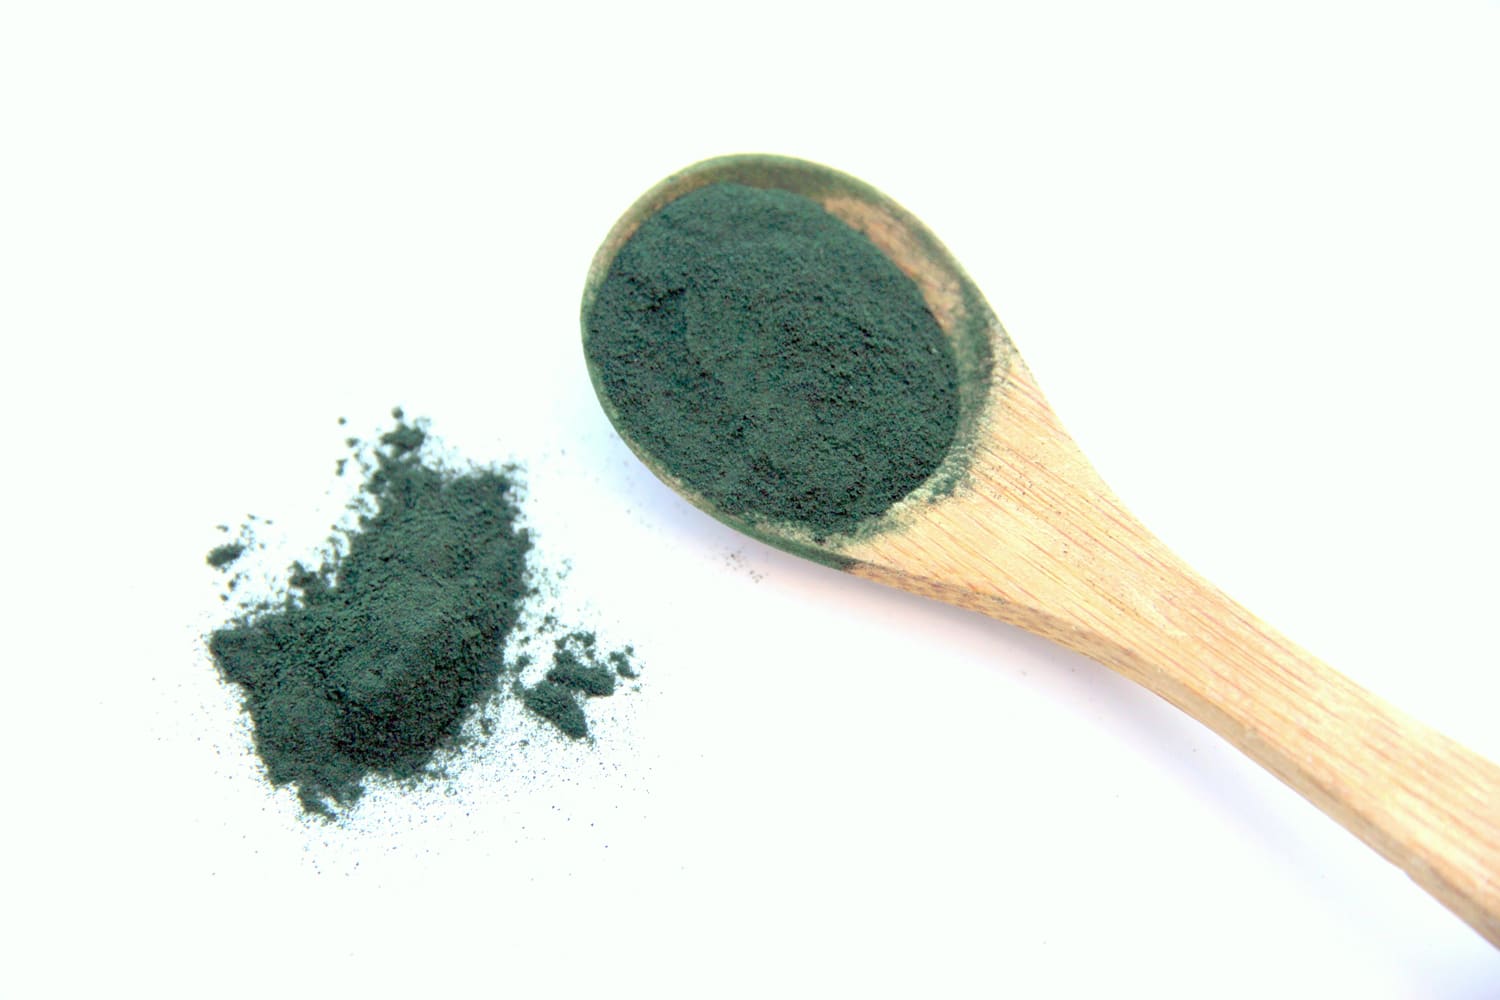 Spirulina: the "made in Italy" that you do not expect